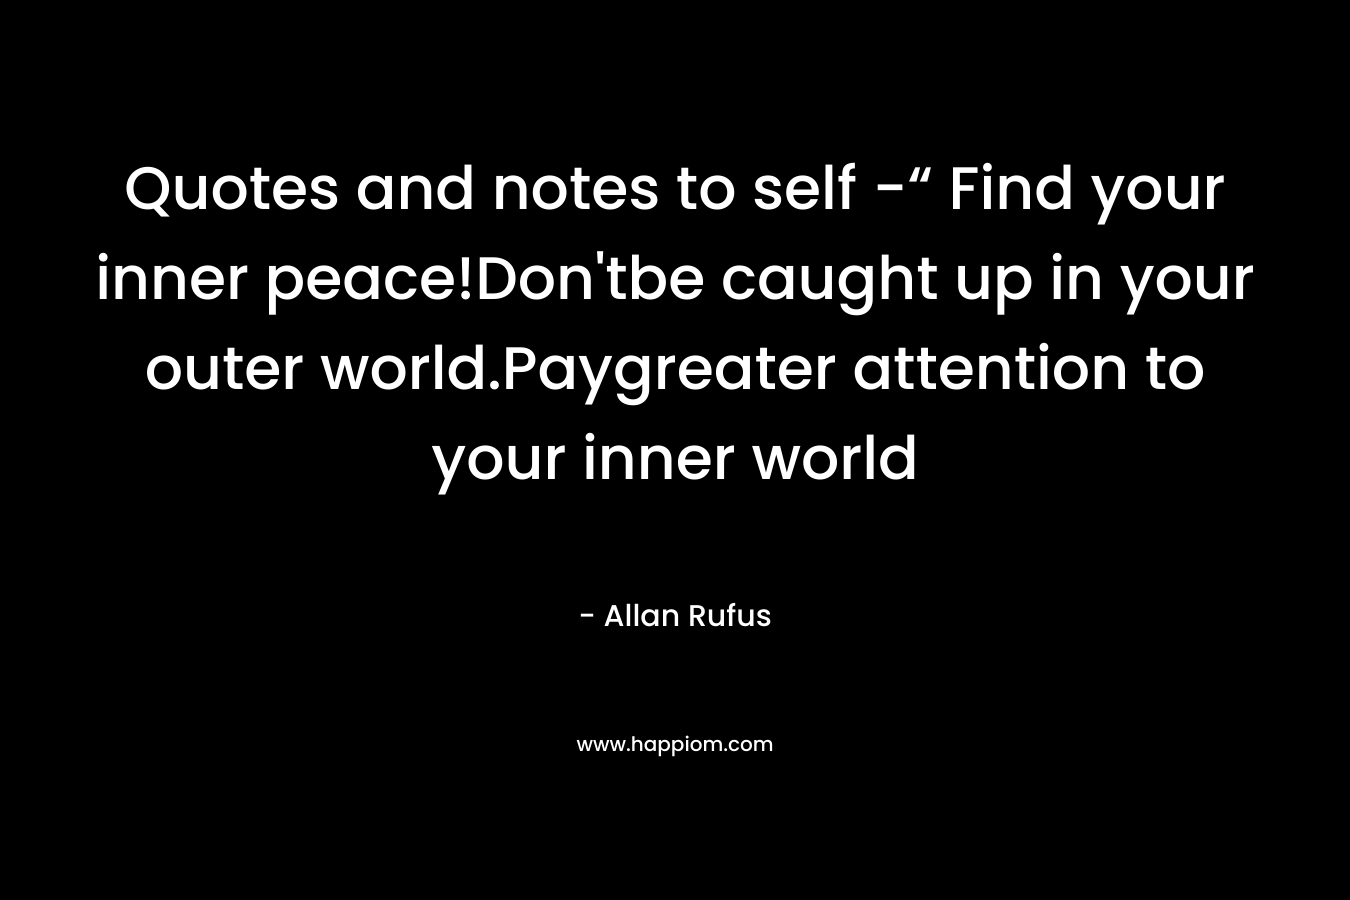 Quotes and notes to self -“ Find your inner peace!Don’tbe caught up in your outer world.Paygreater attention to your inner world – Allan Rufus